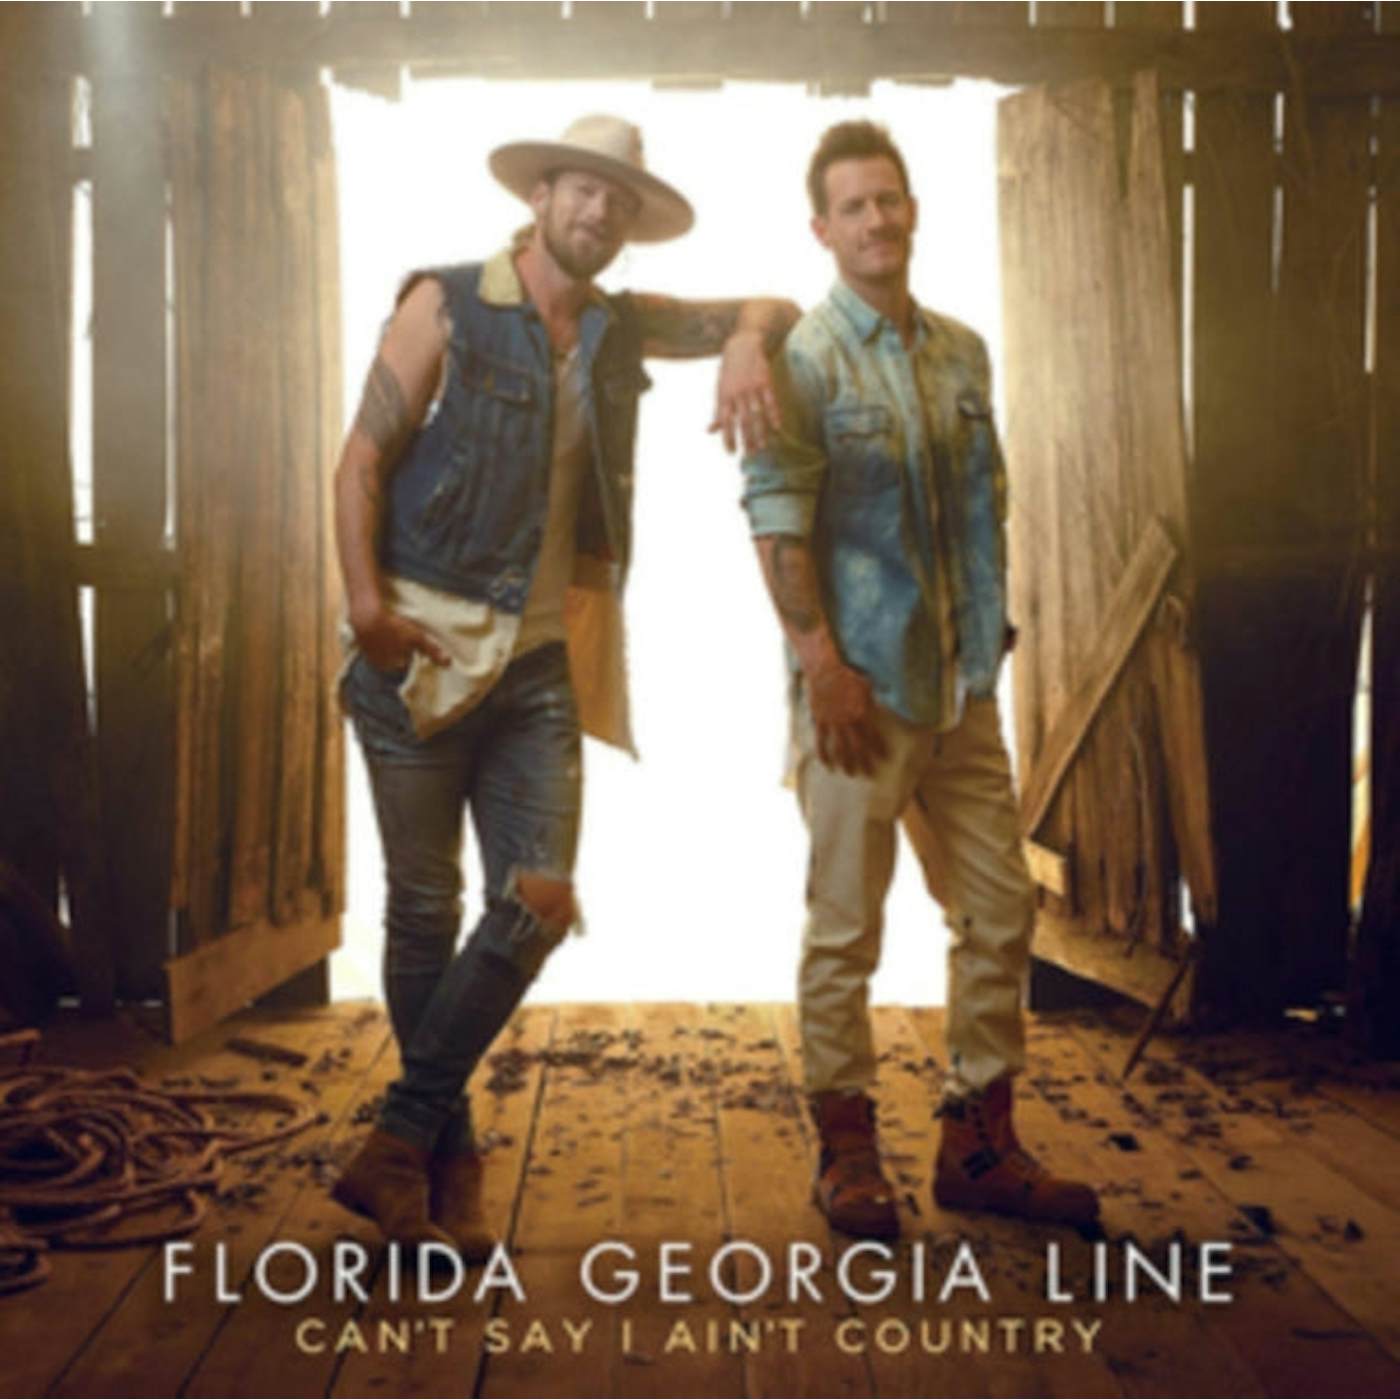 Florida Georgia Line LP Vinyl Record - Can't Say I Ain't Country